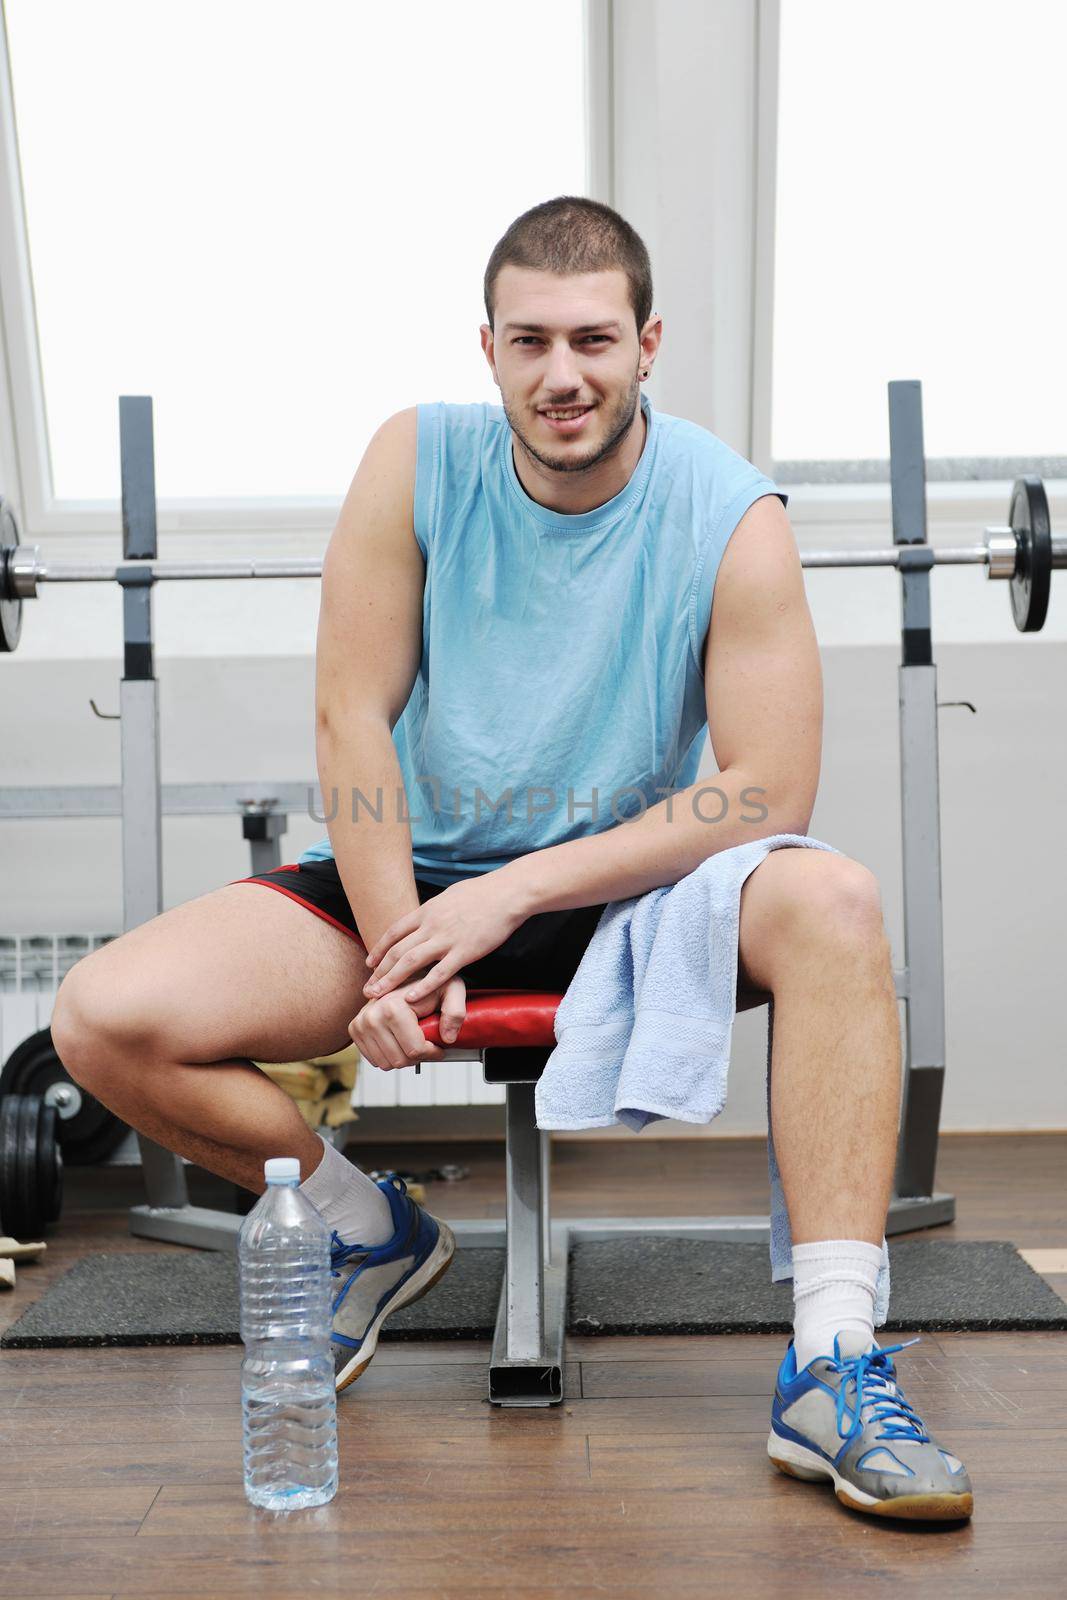 young man in fintess sport club exercise withweights and relaxing